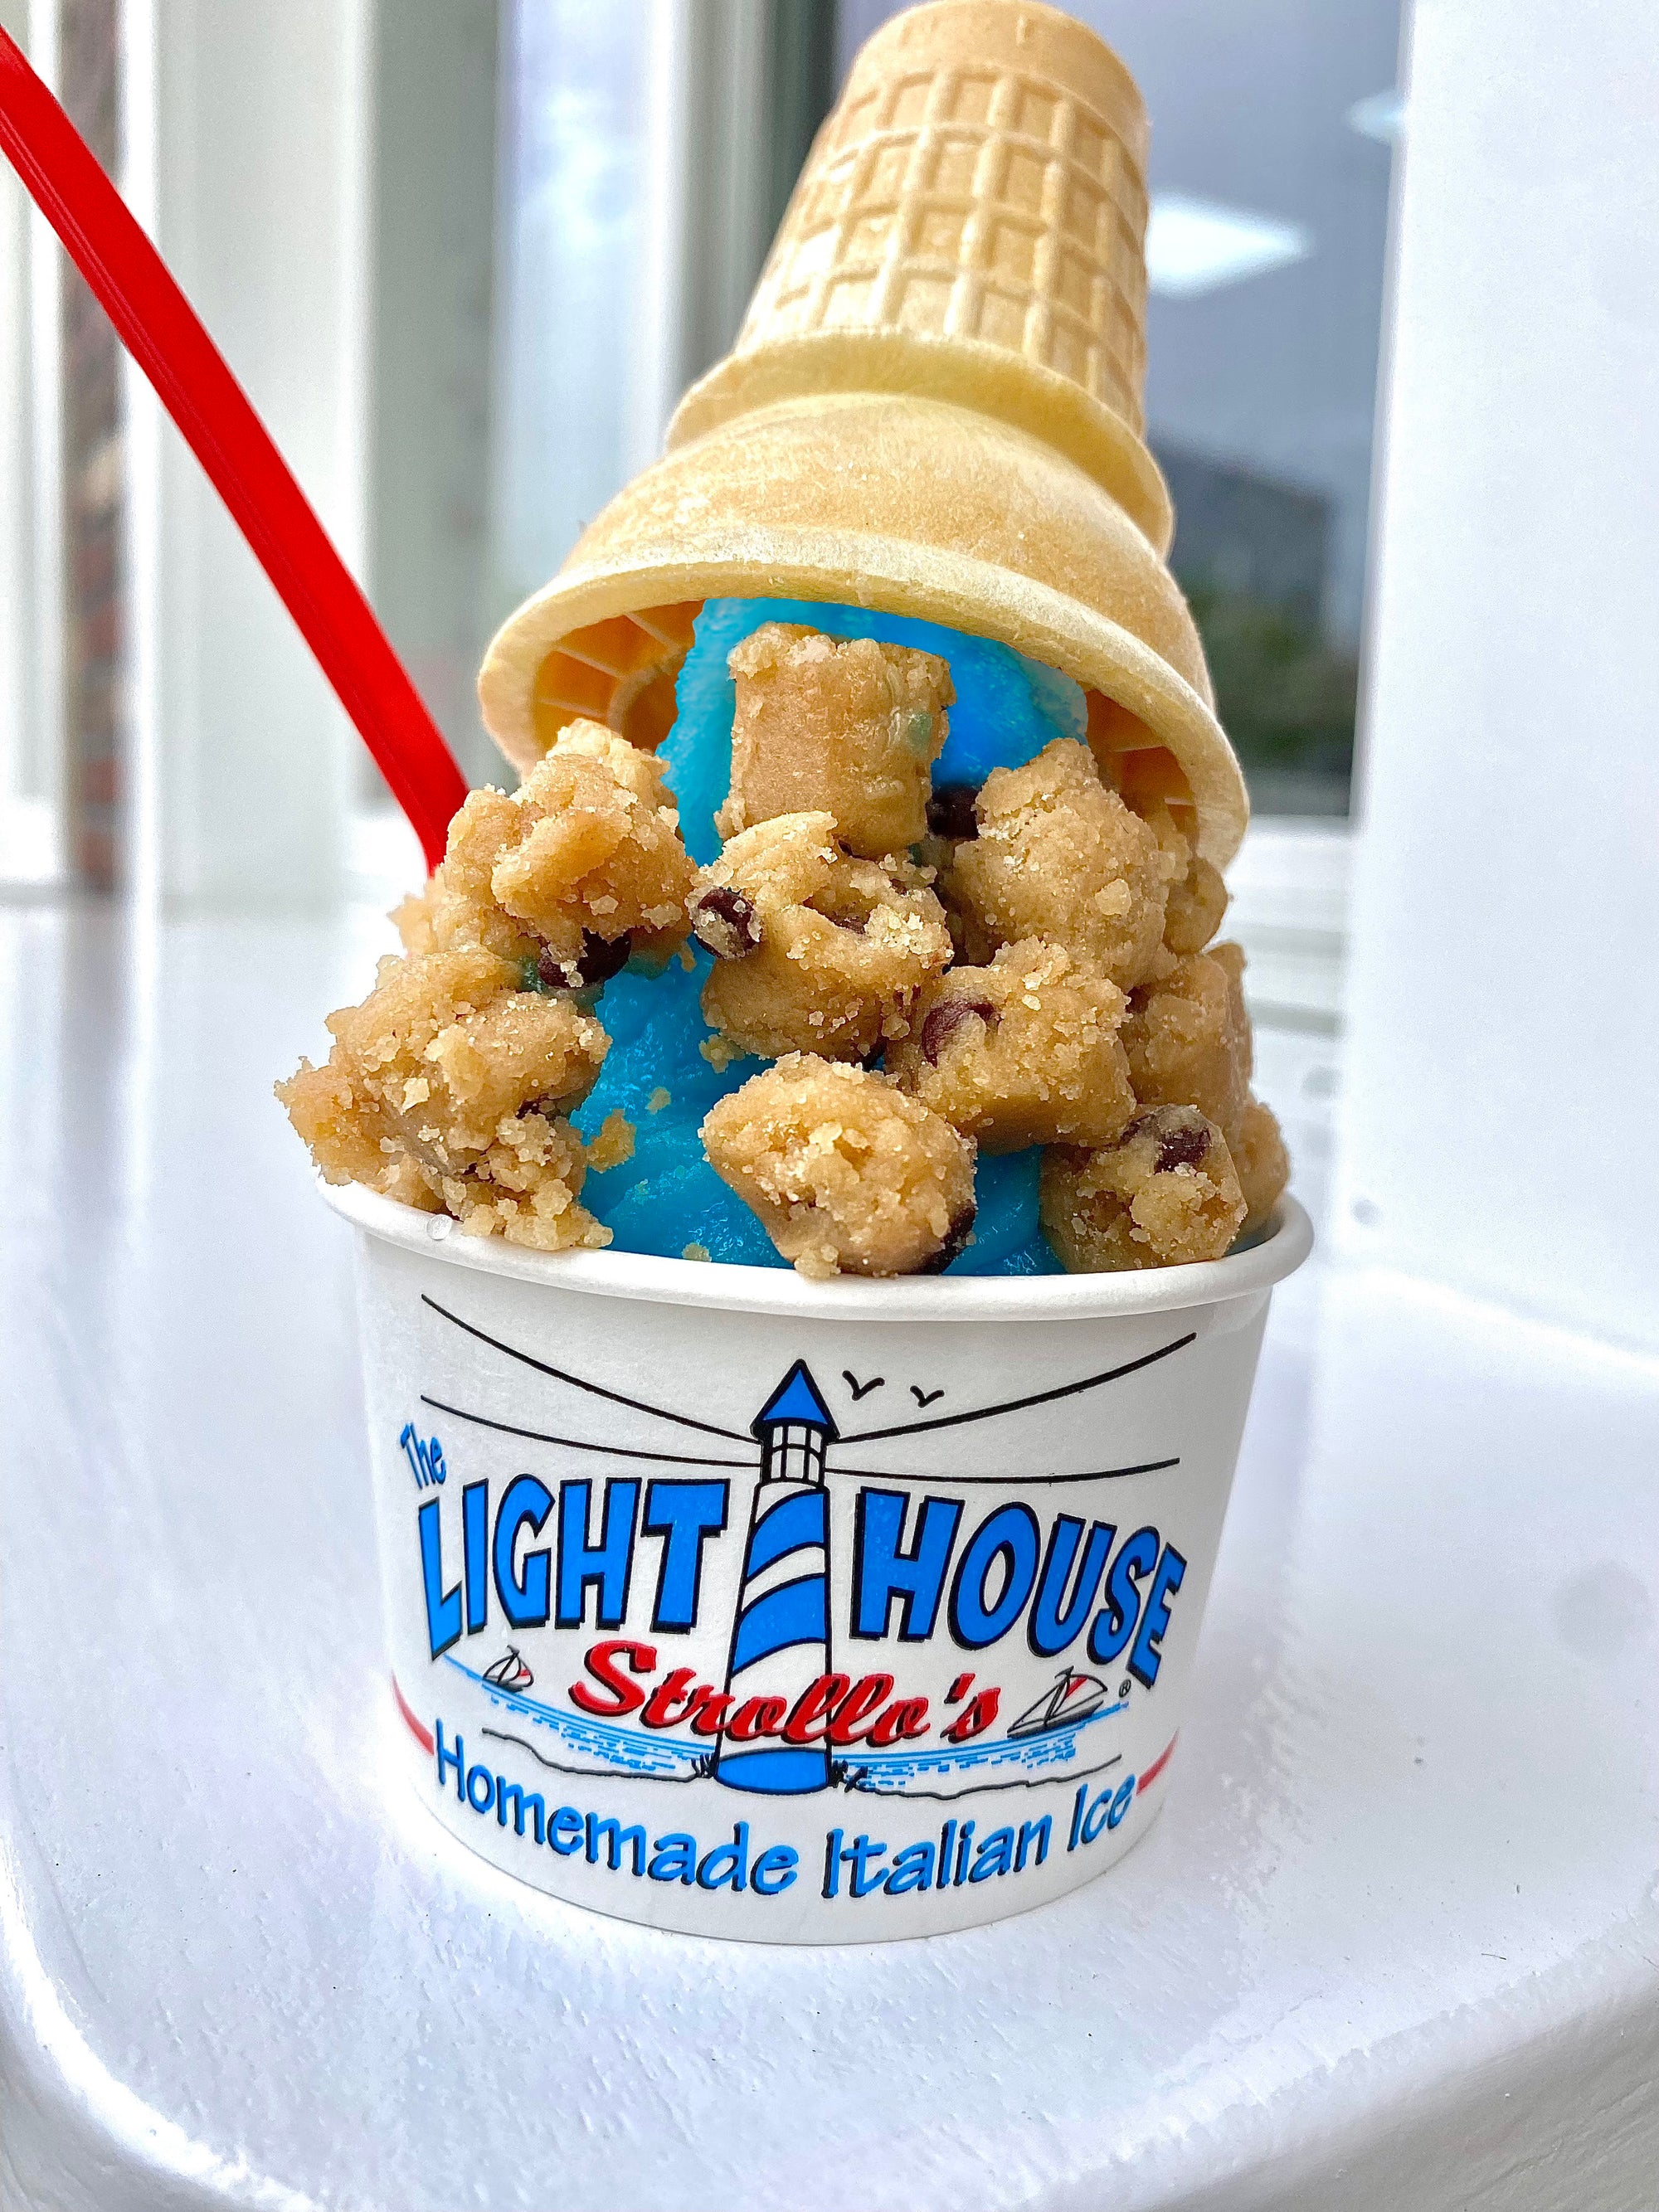 A Strollo's Lighthouse cup with blue raspberry homemade Italian Ice topped with cookie dough and a wafer cone